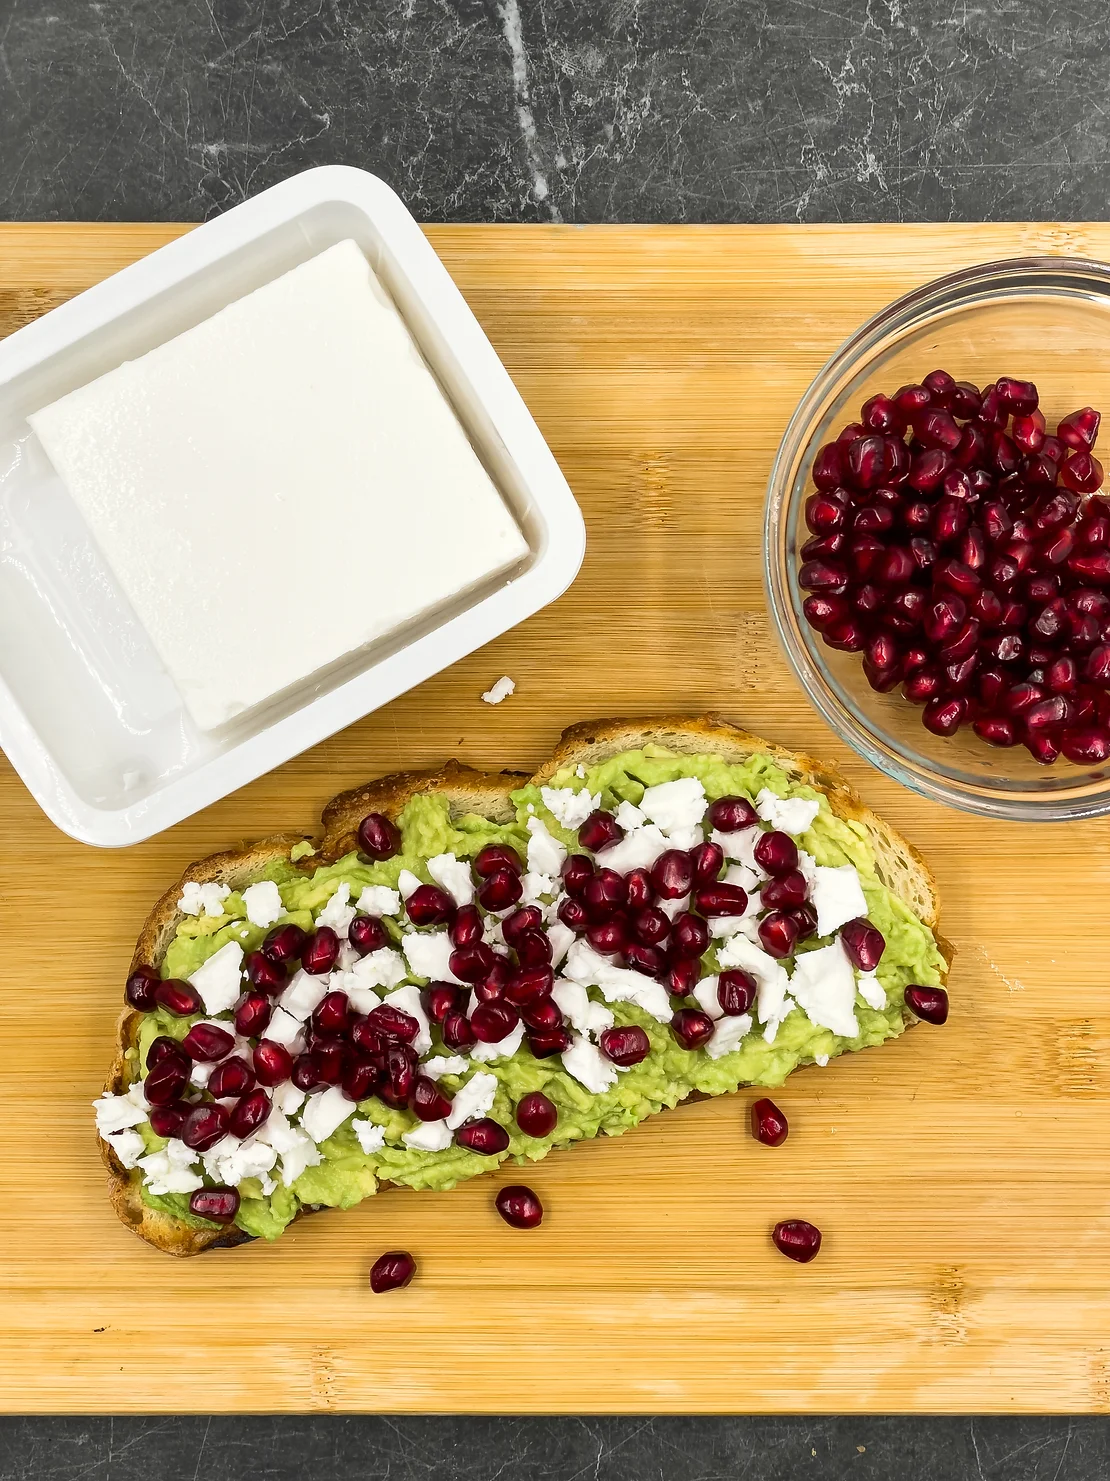 Get Your Morning Supercharged with Pomegranate Avocado Toast